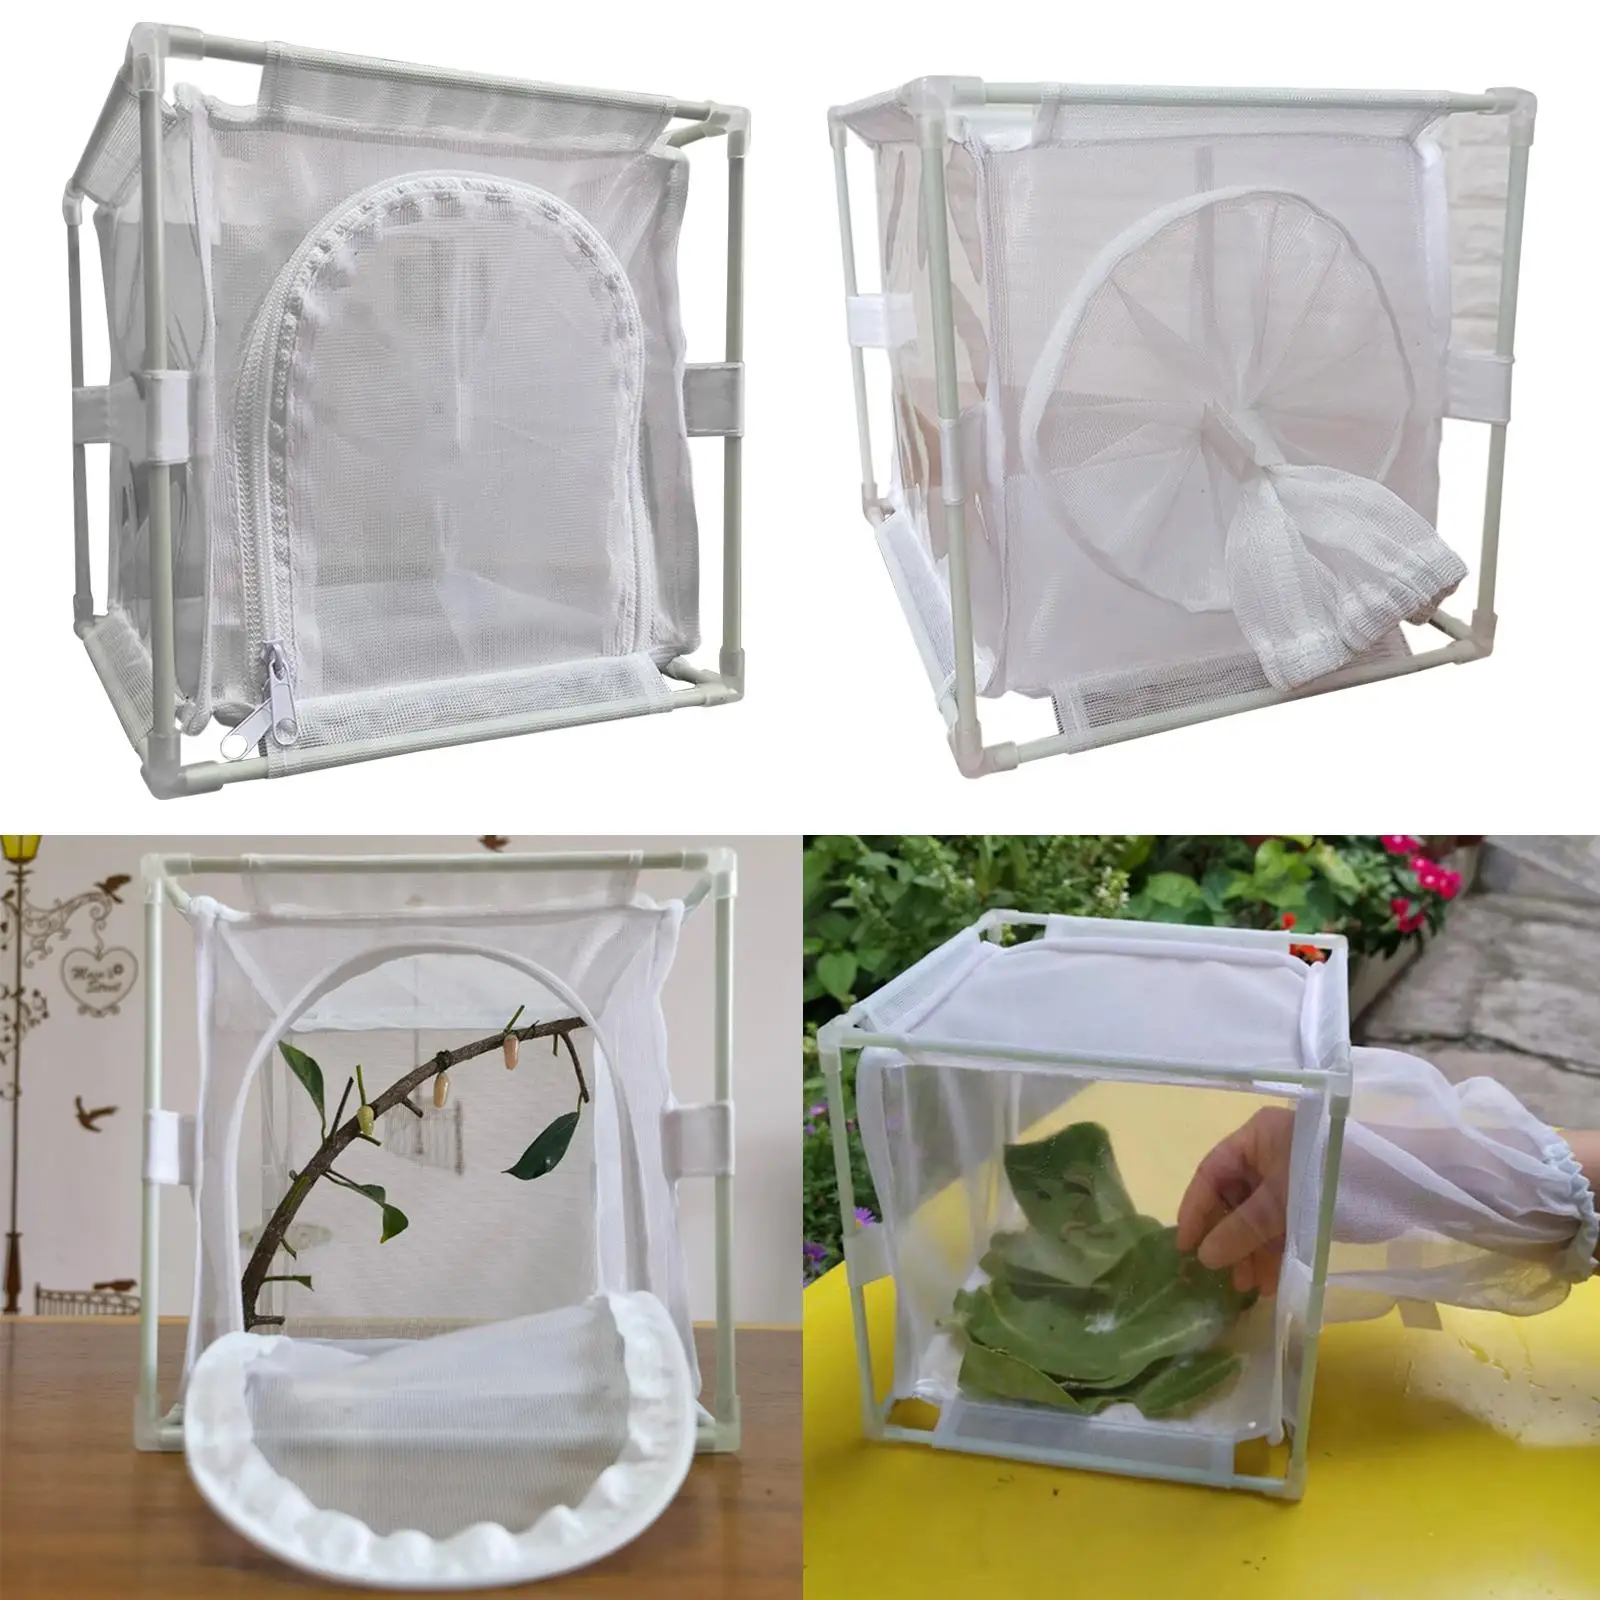 Shade Cages Detachable Reusable Multi Use Ventilation Observation Cage Net Cage for Yard Greenhouse Outdoor